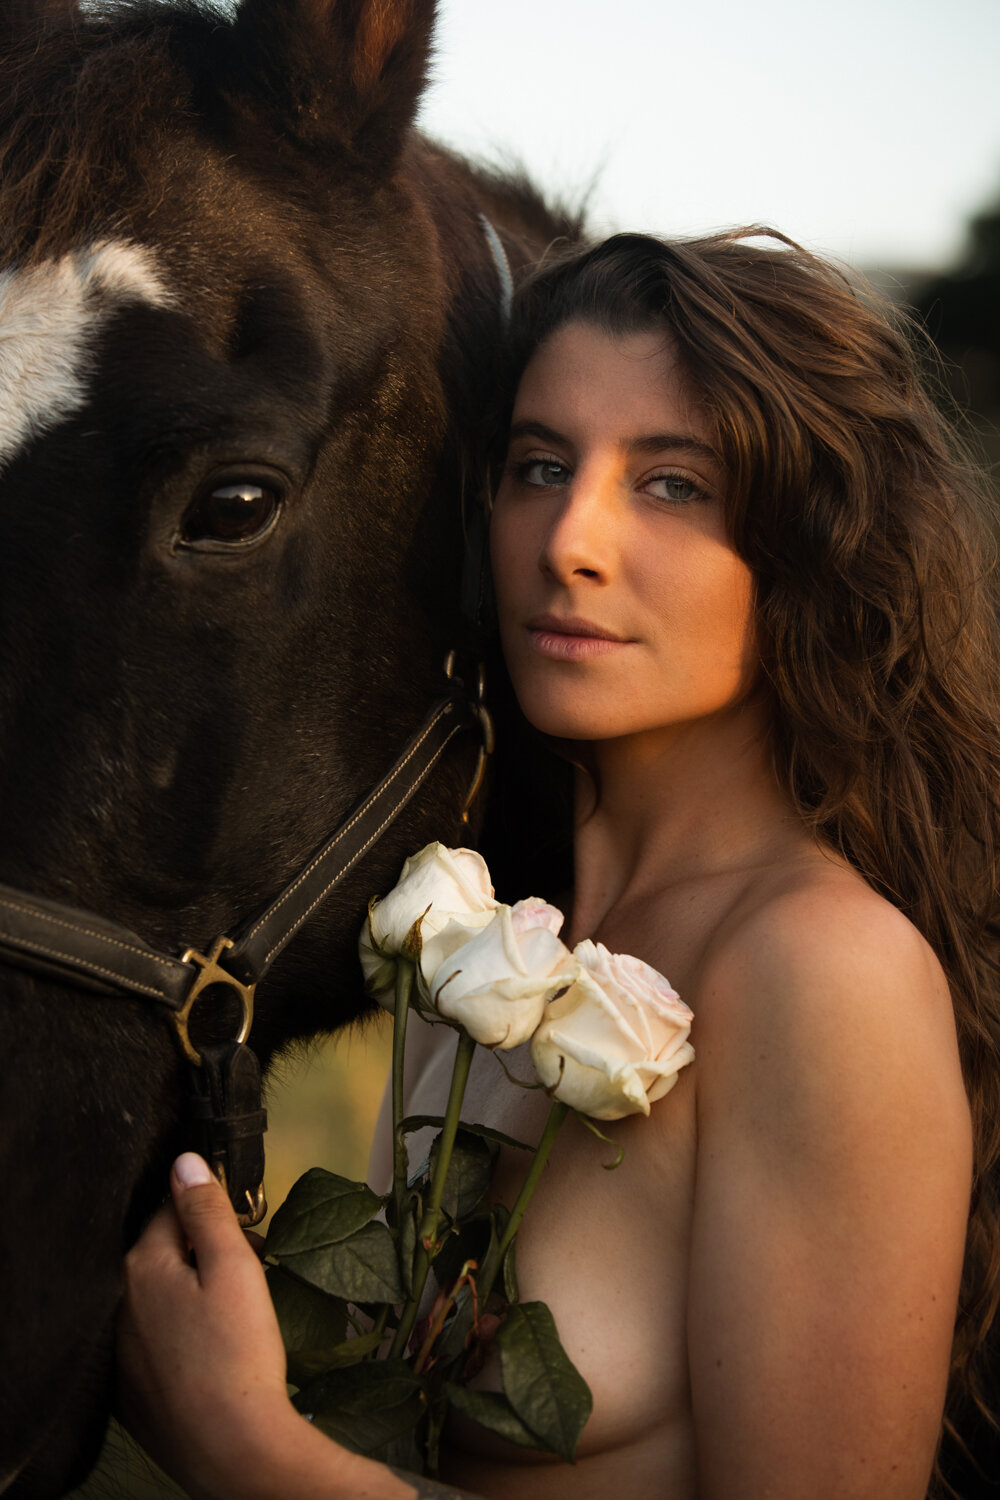 Immortale corsica corse beauty products beautiful horse model produits beaute beach travel Krista Espino sea island mediterranean photographe photographer fashion lifestyle editorial nature natural france french skin skincare face mask rose country-36.jpg